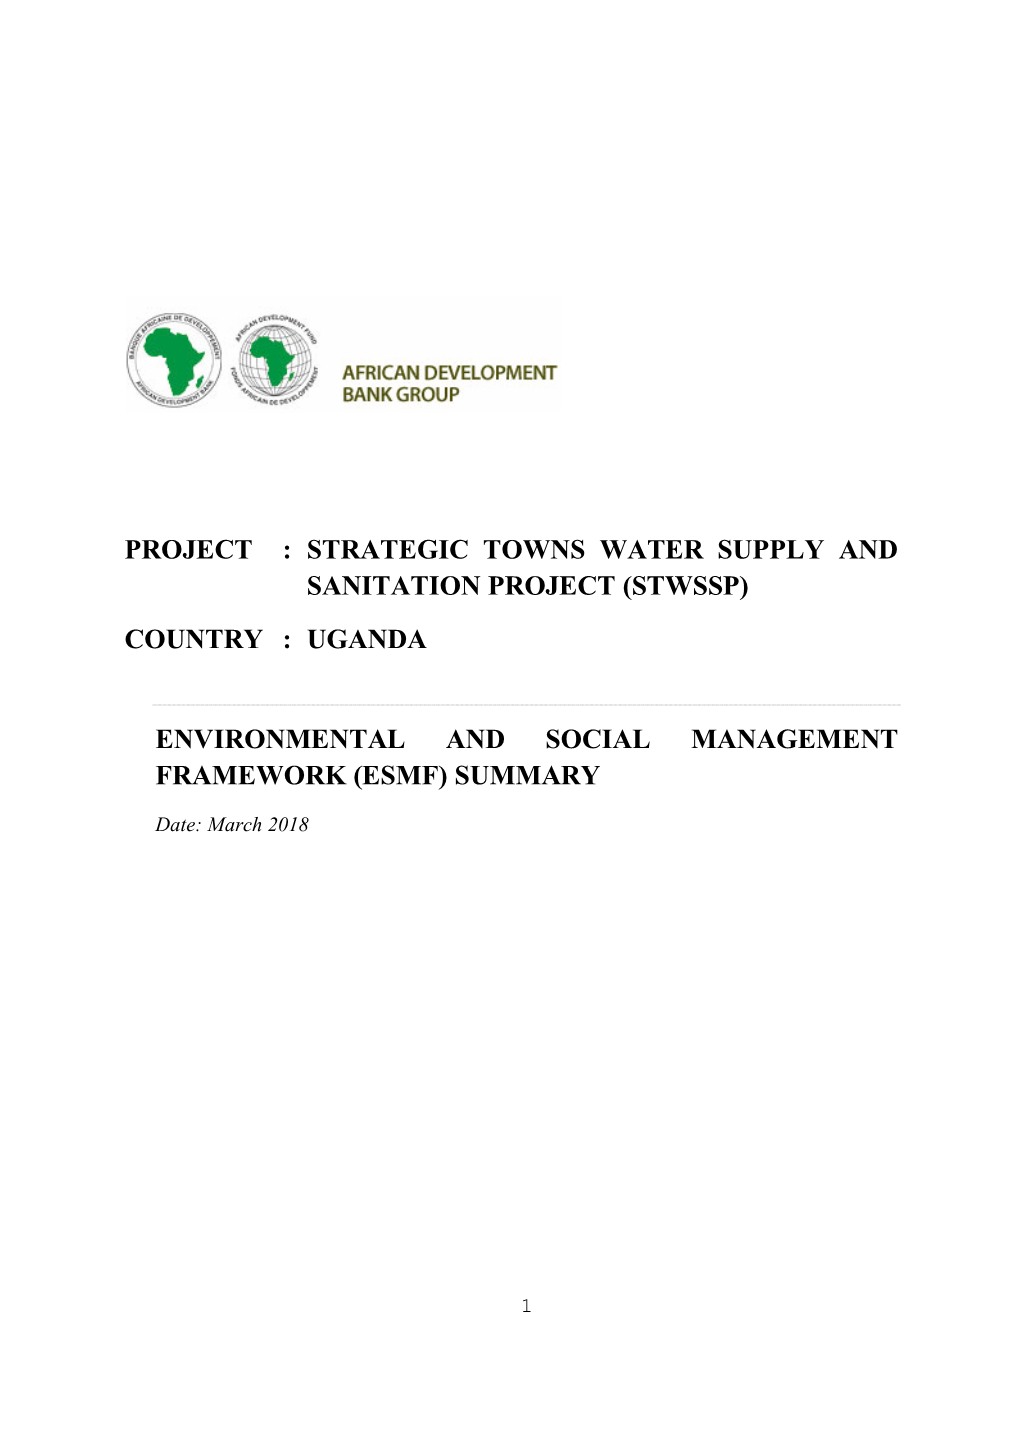 Strategic Towns Water Supply and Sanitation Project (Stwssp) Country : Uganda